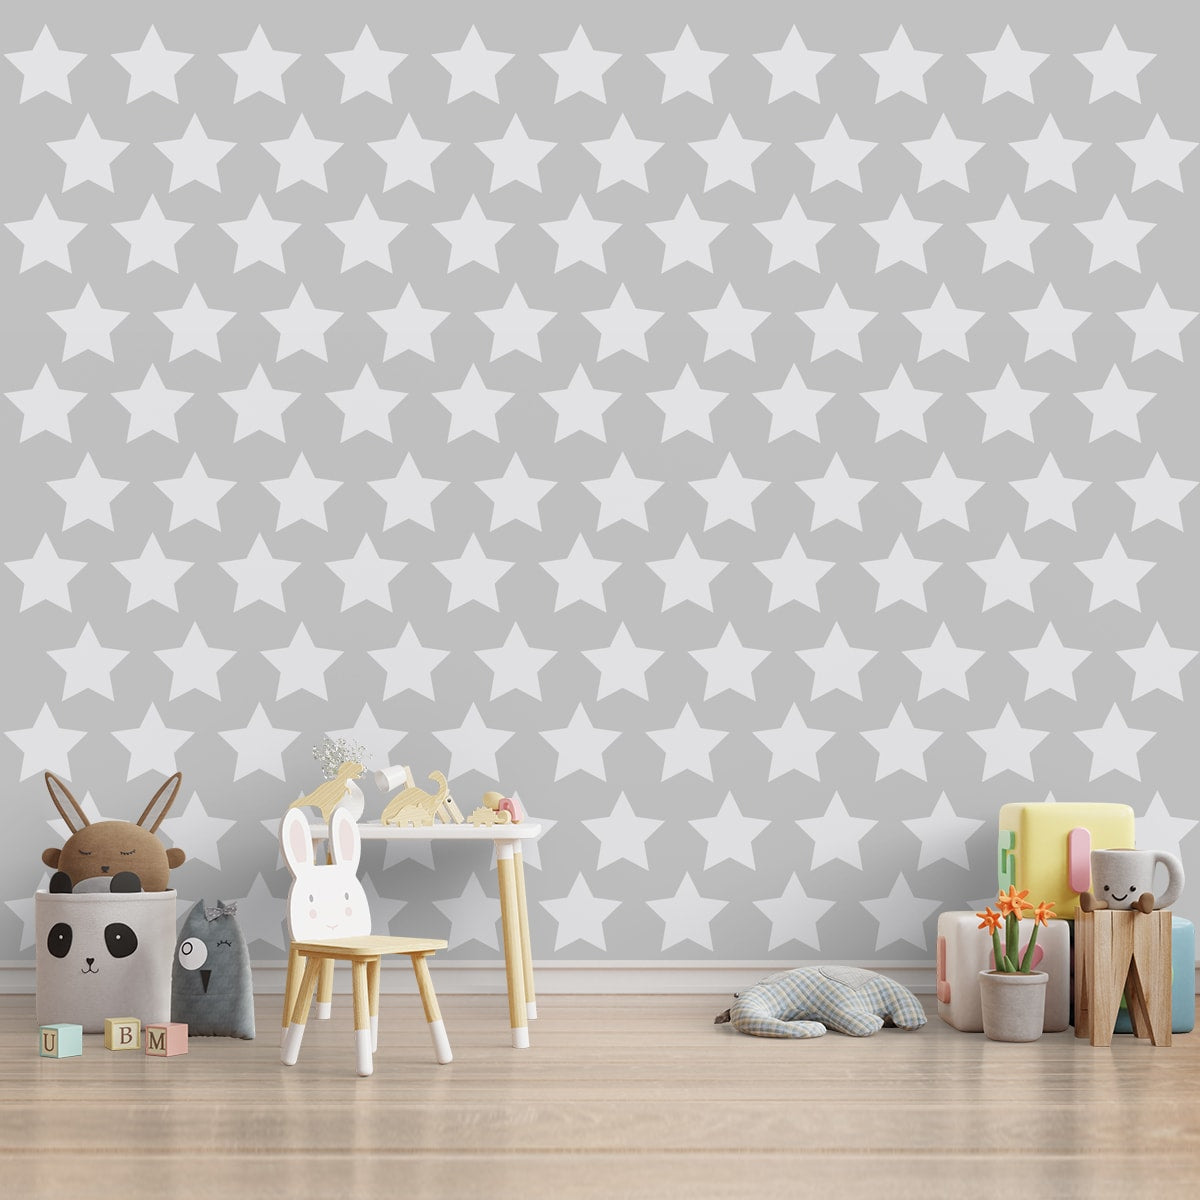 Stars Theme Repeat Pattern Wallpaper for Young Children Rooms